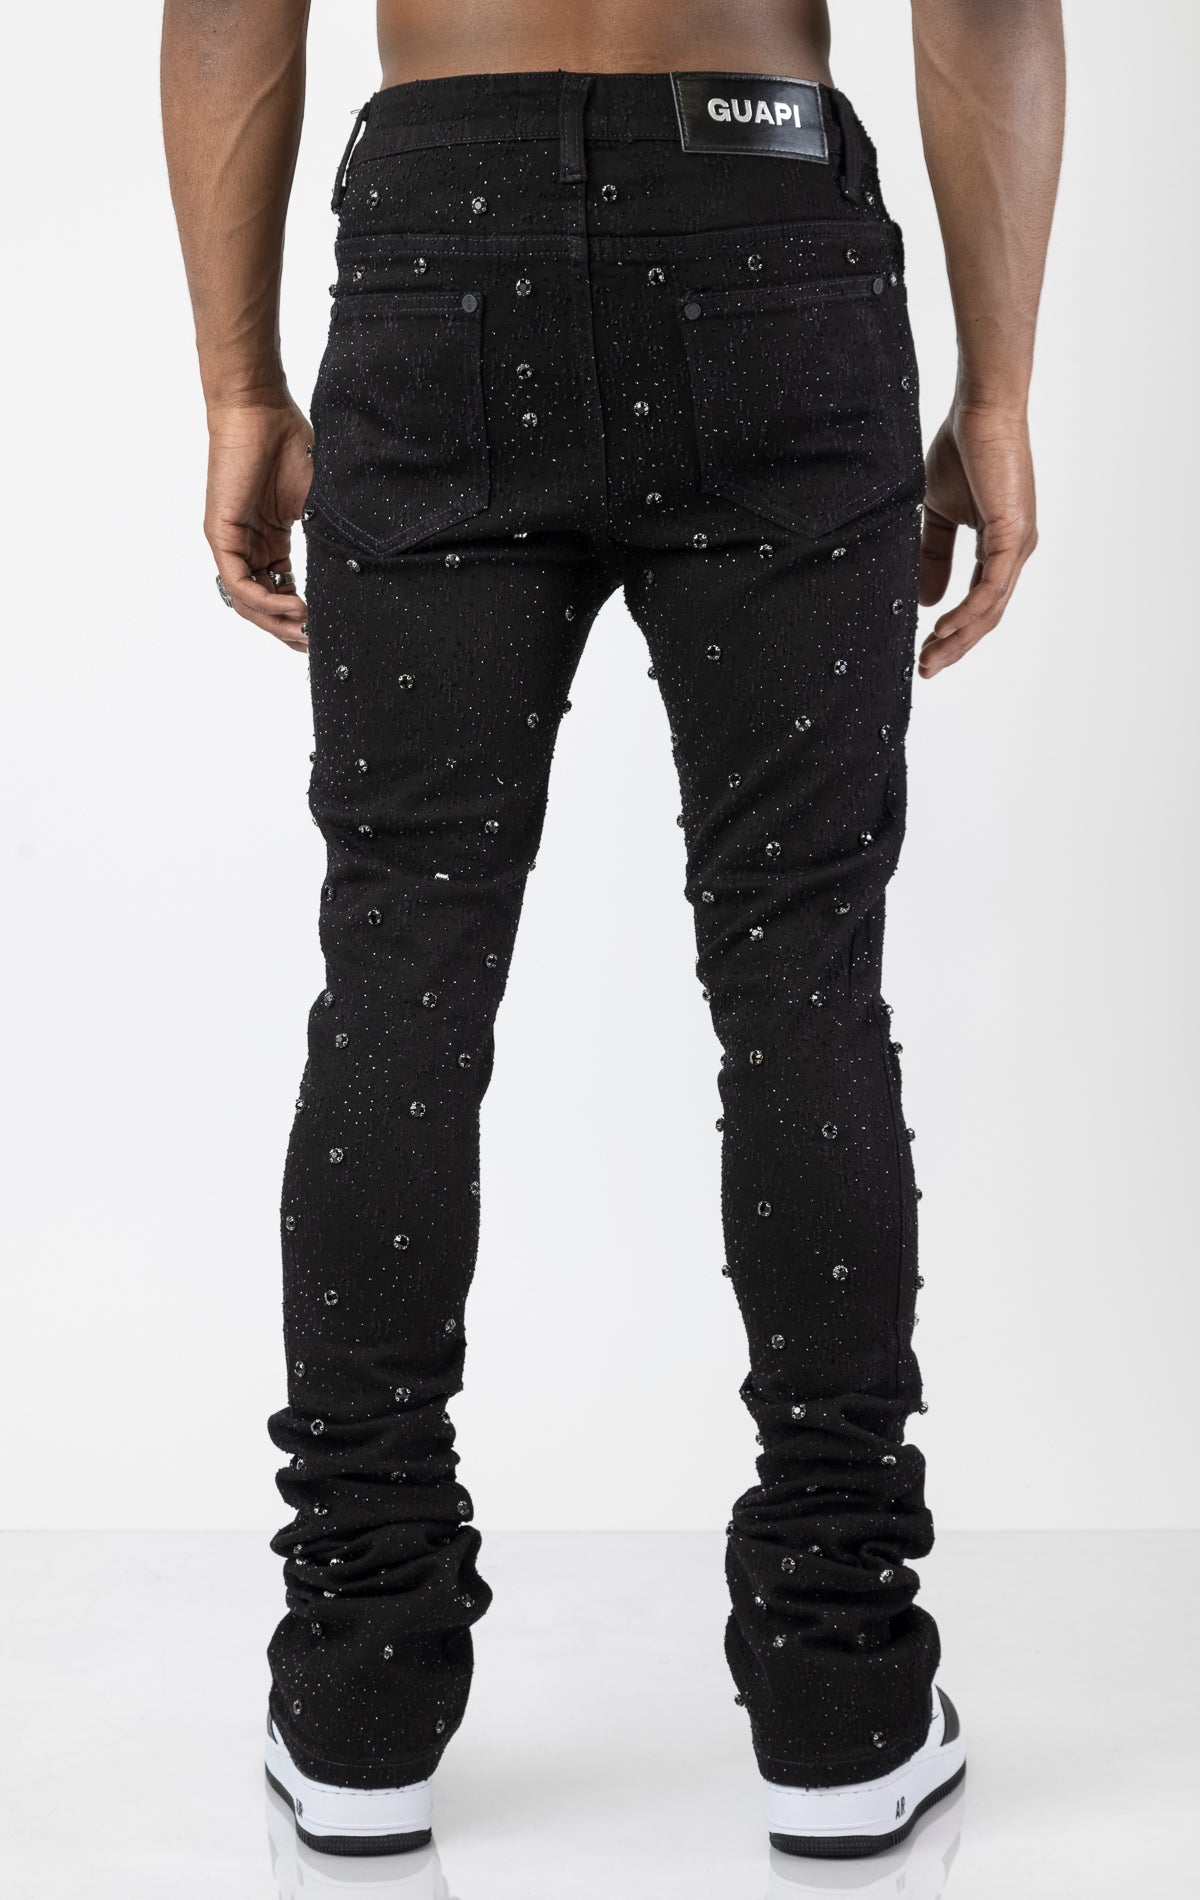 Men's black, tapered-fit jeans with a luxurious cotton-blend fabric (98% cotton, 2% elastane) and custom hardware. The jeans feature subtle laser distressing throughout, delicate diamond embellishments, and a five-pocket design. They stack comfortably above the ankle. 